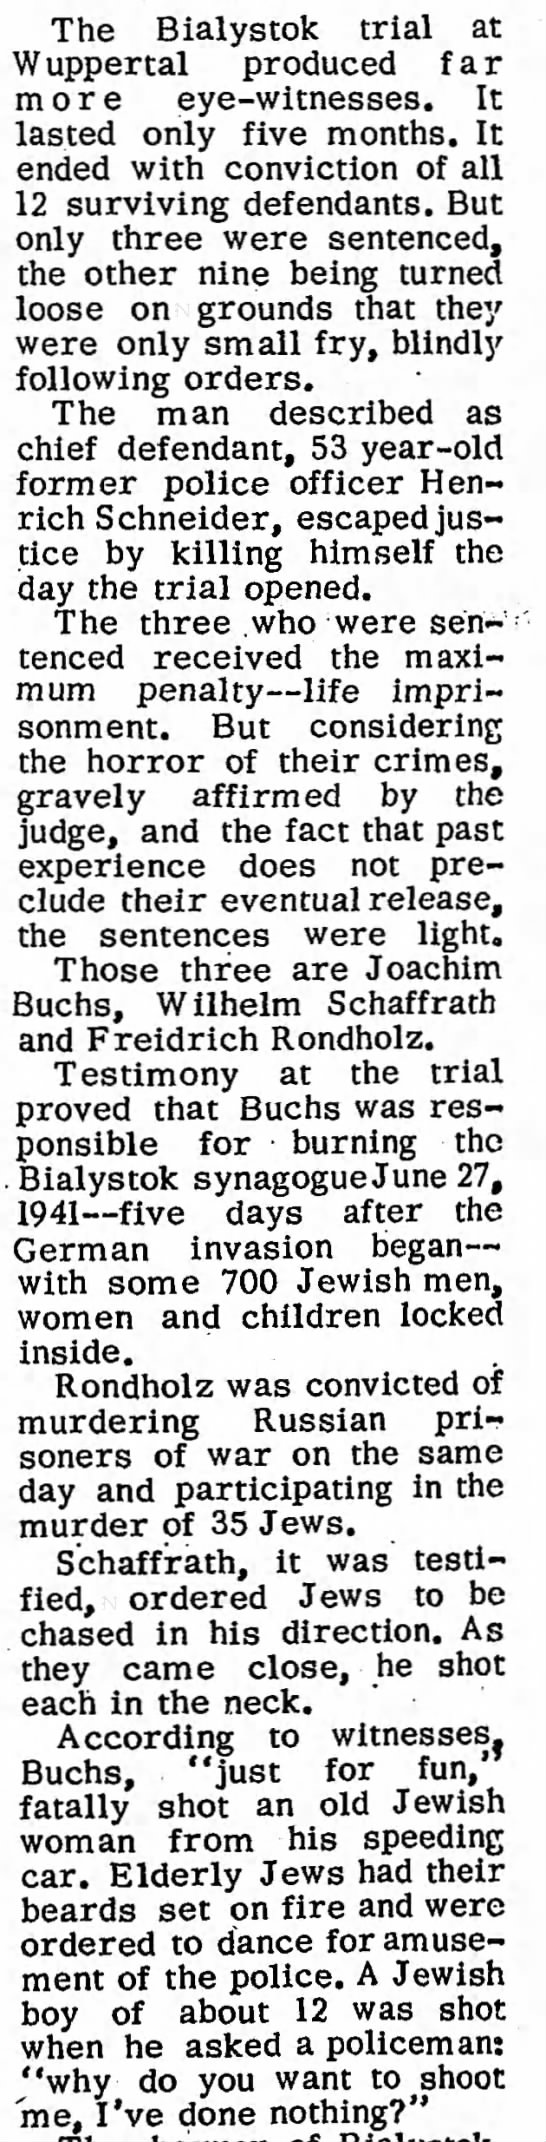 Excerpt from article with accounts of Nazi violence against Jews during Operation Barbarossa - 